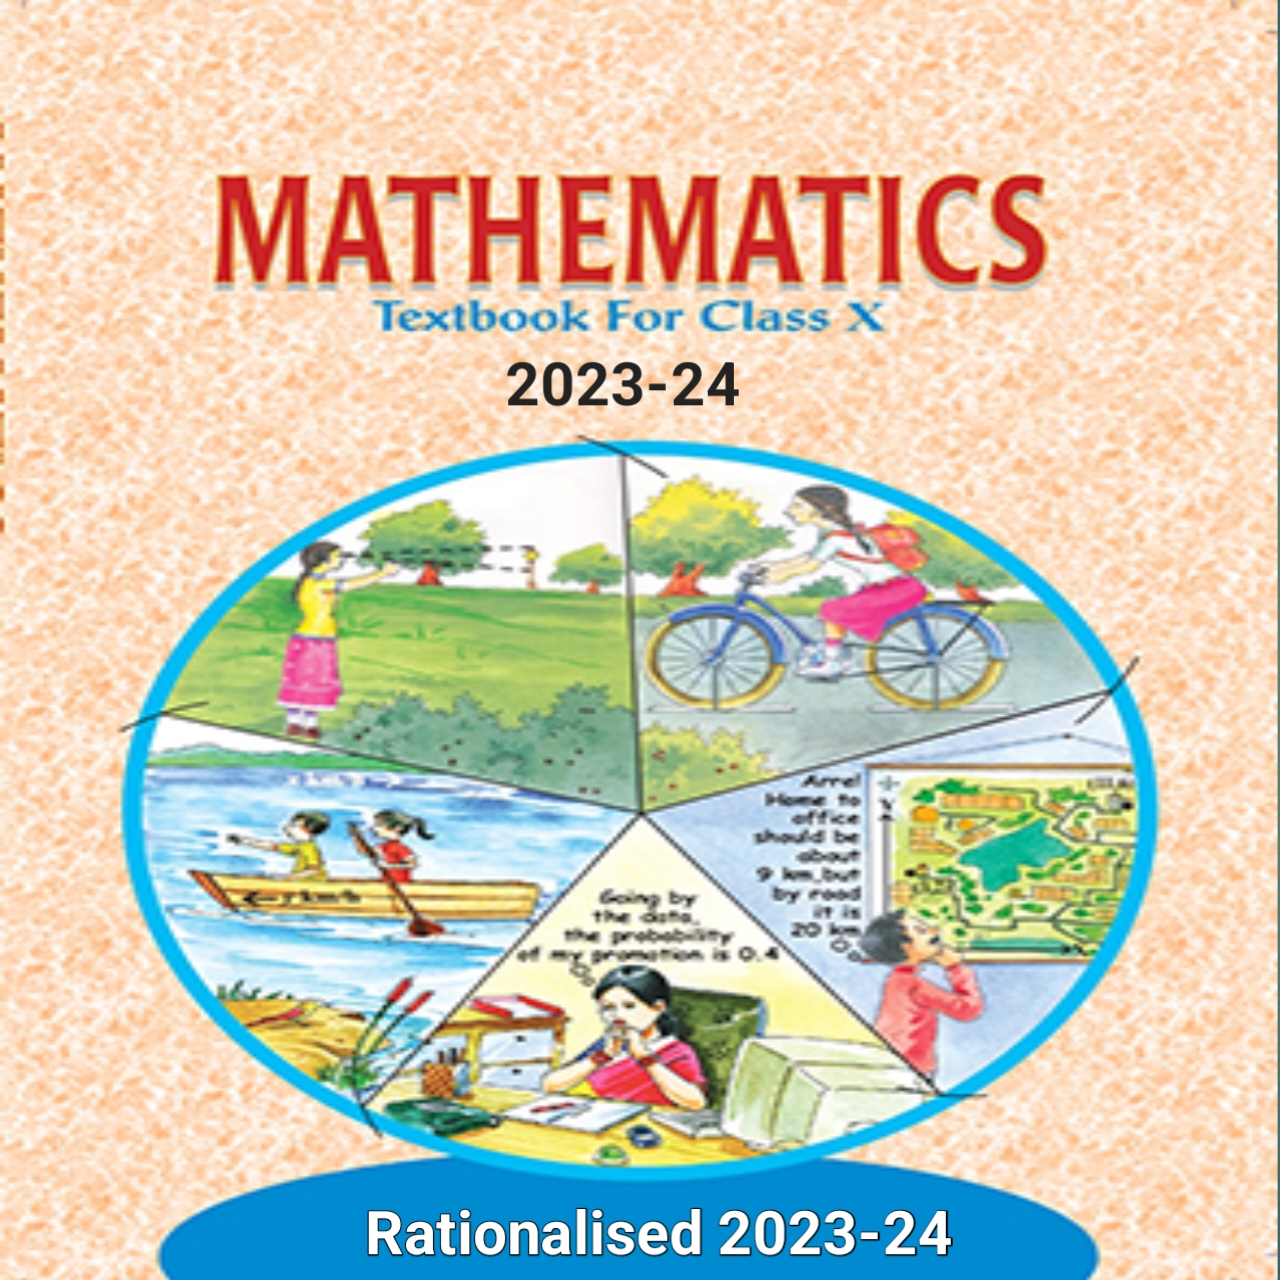 NCERT Books Class 10 Maths Free PDF Download For 202324 » Maths And